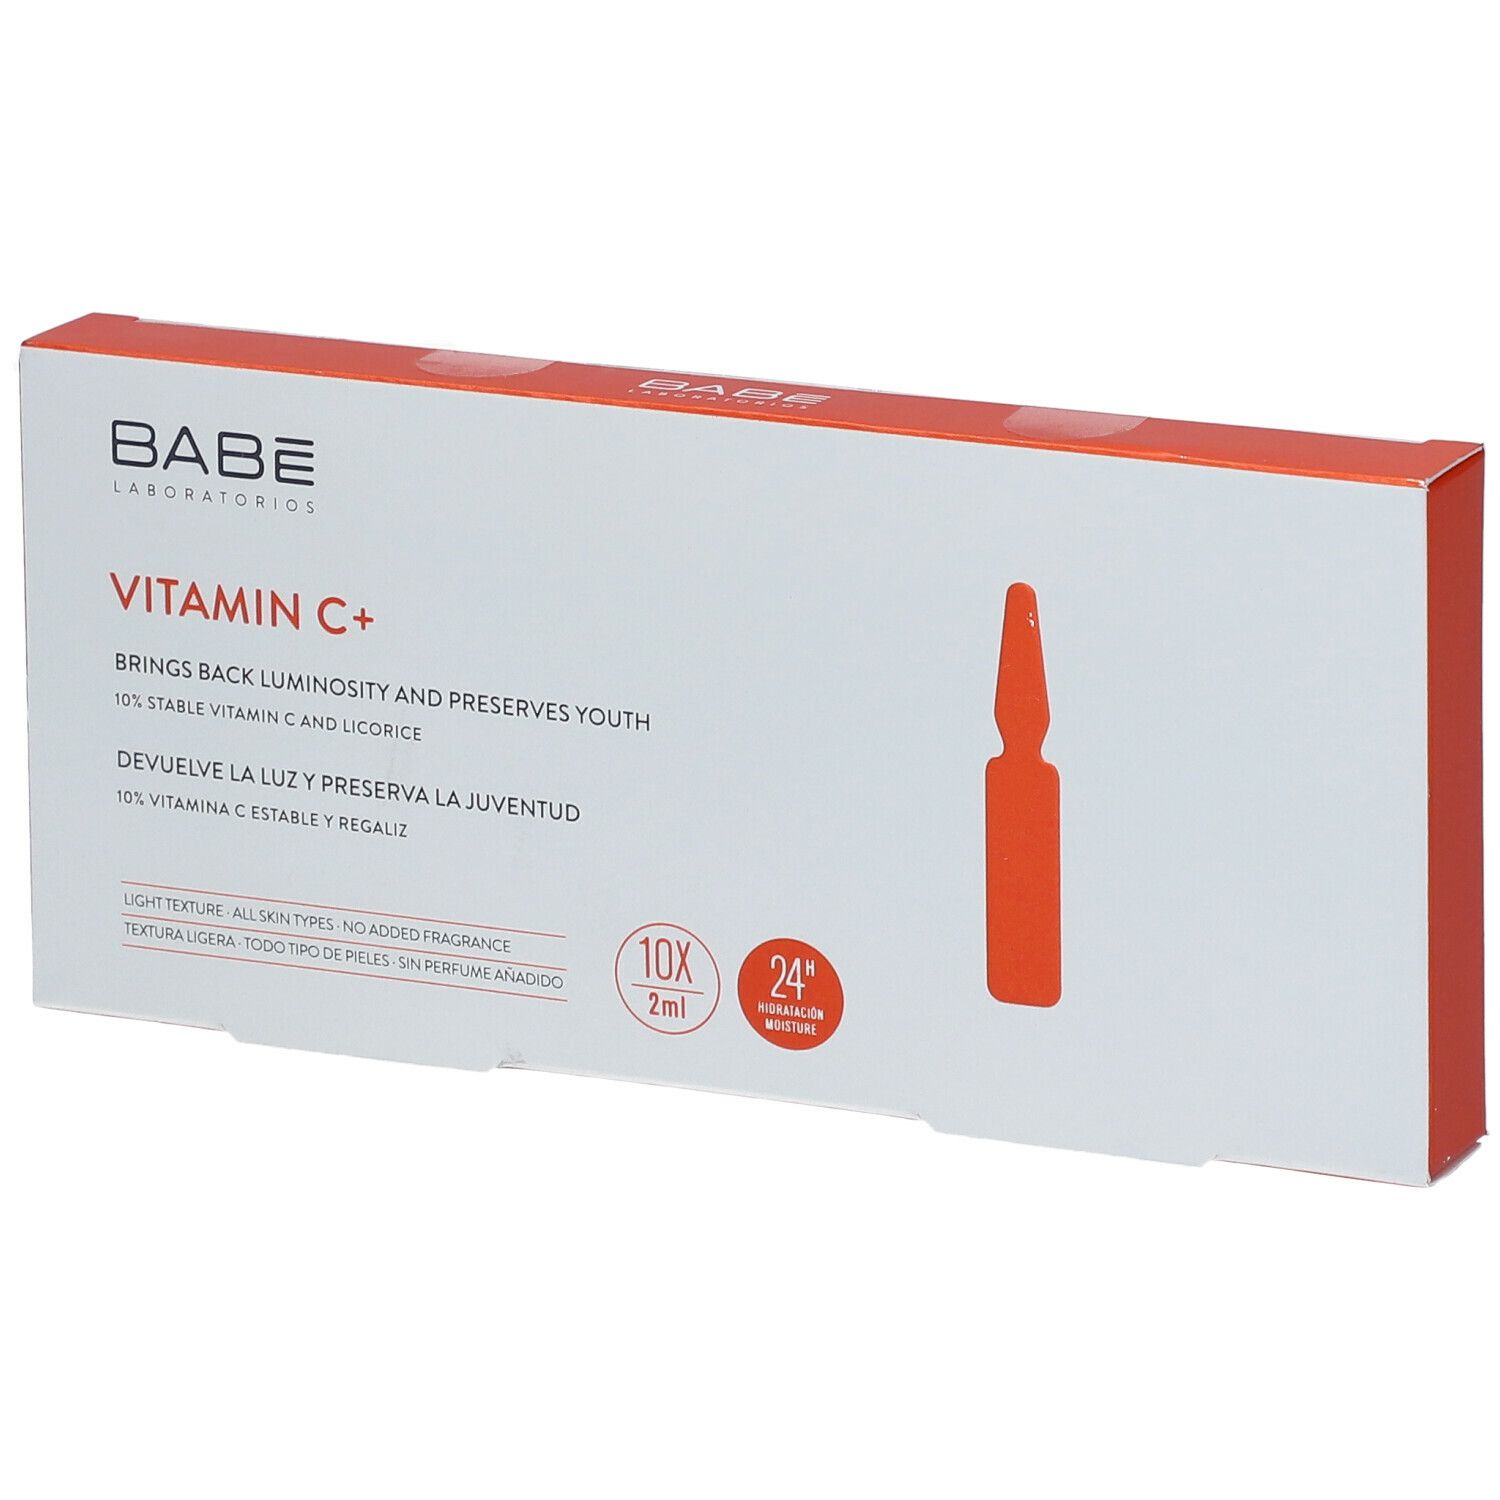 Babé Vitamin C+ Radiance & Smoothing Ampoules